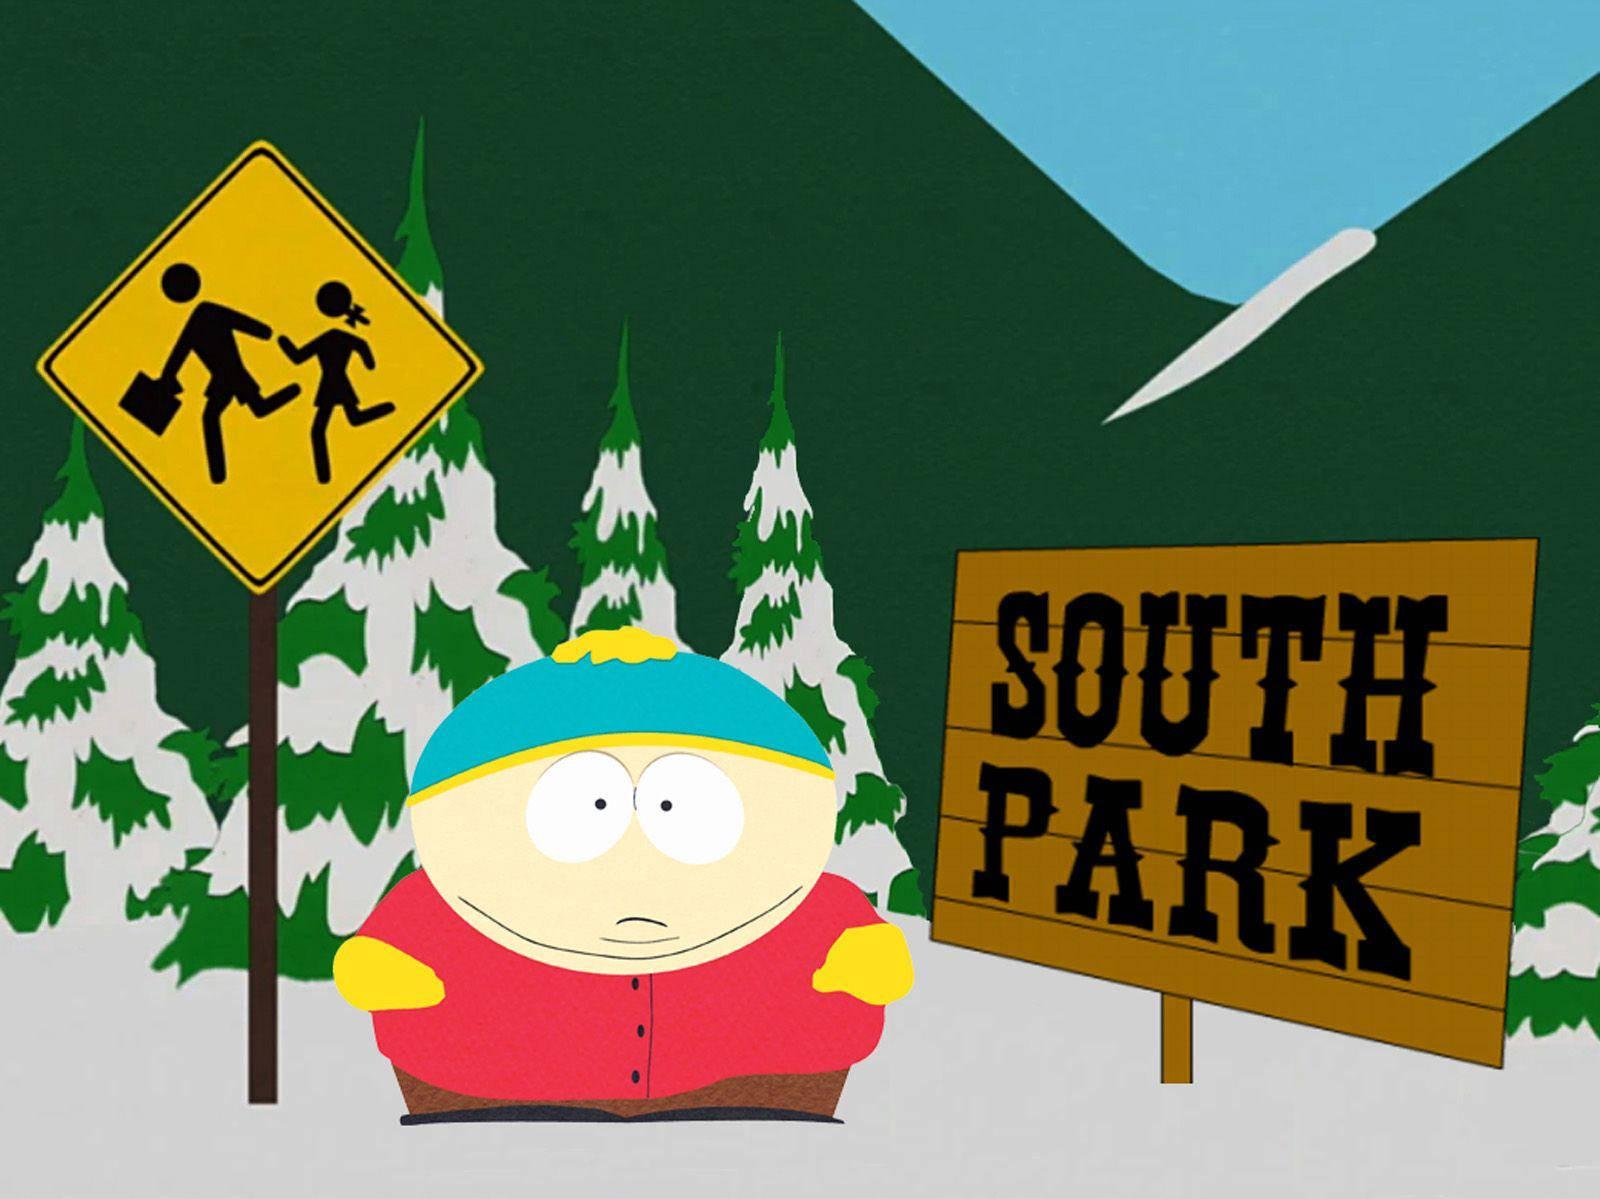 Free Eric Cartman Pictures [100] Eric Cartman Pictures for FREE